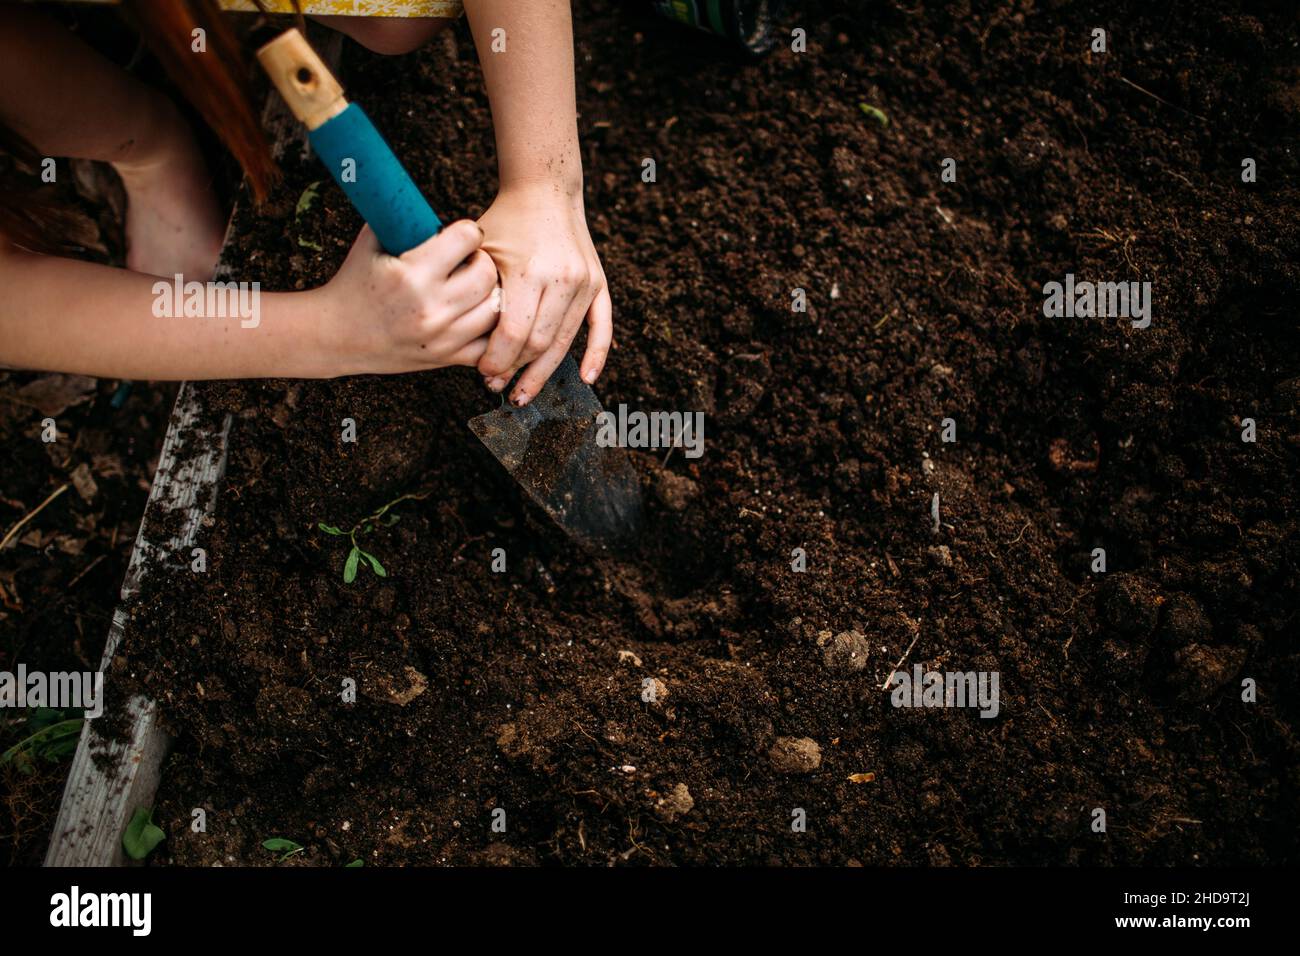 Overhead of young girl digging in dirt outside Stock Photo